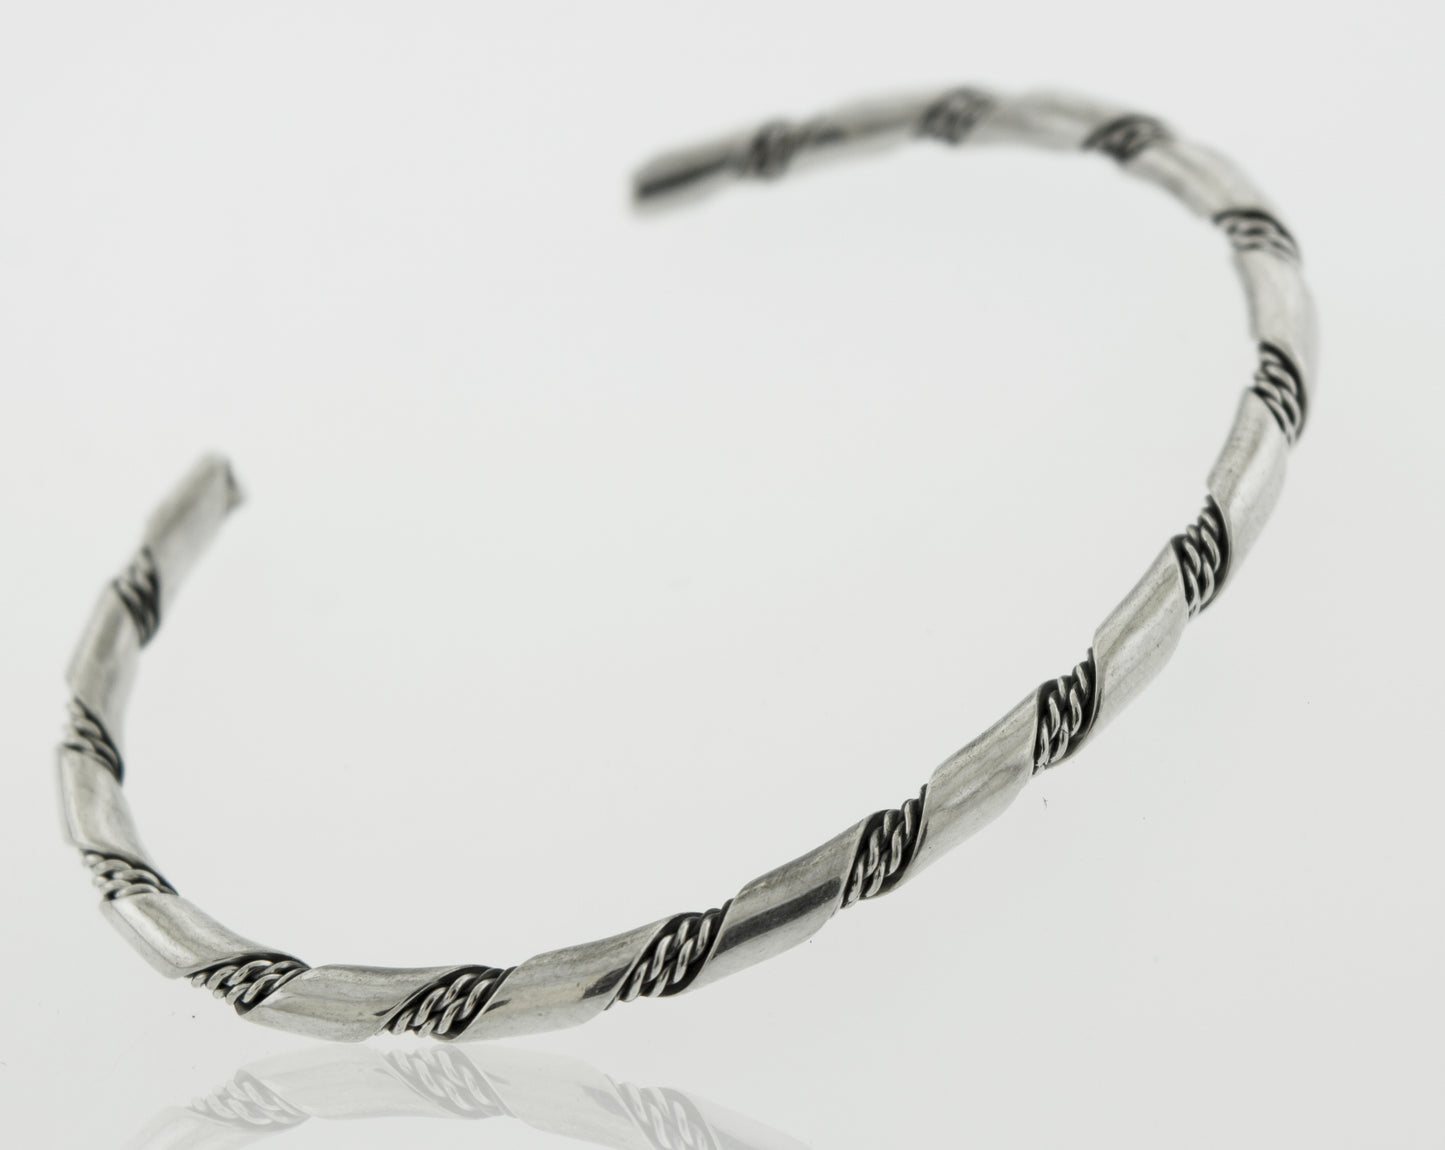 Addition: A stunning Native American Handmade Thin Silver Twist Cuff bracelet by Super Silver, perfect for adding a touch of elegance to any outfit.